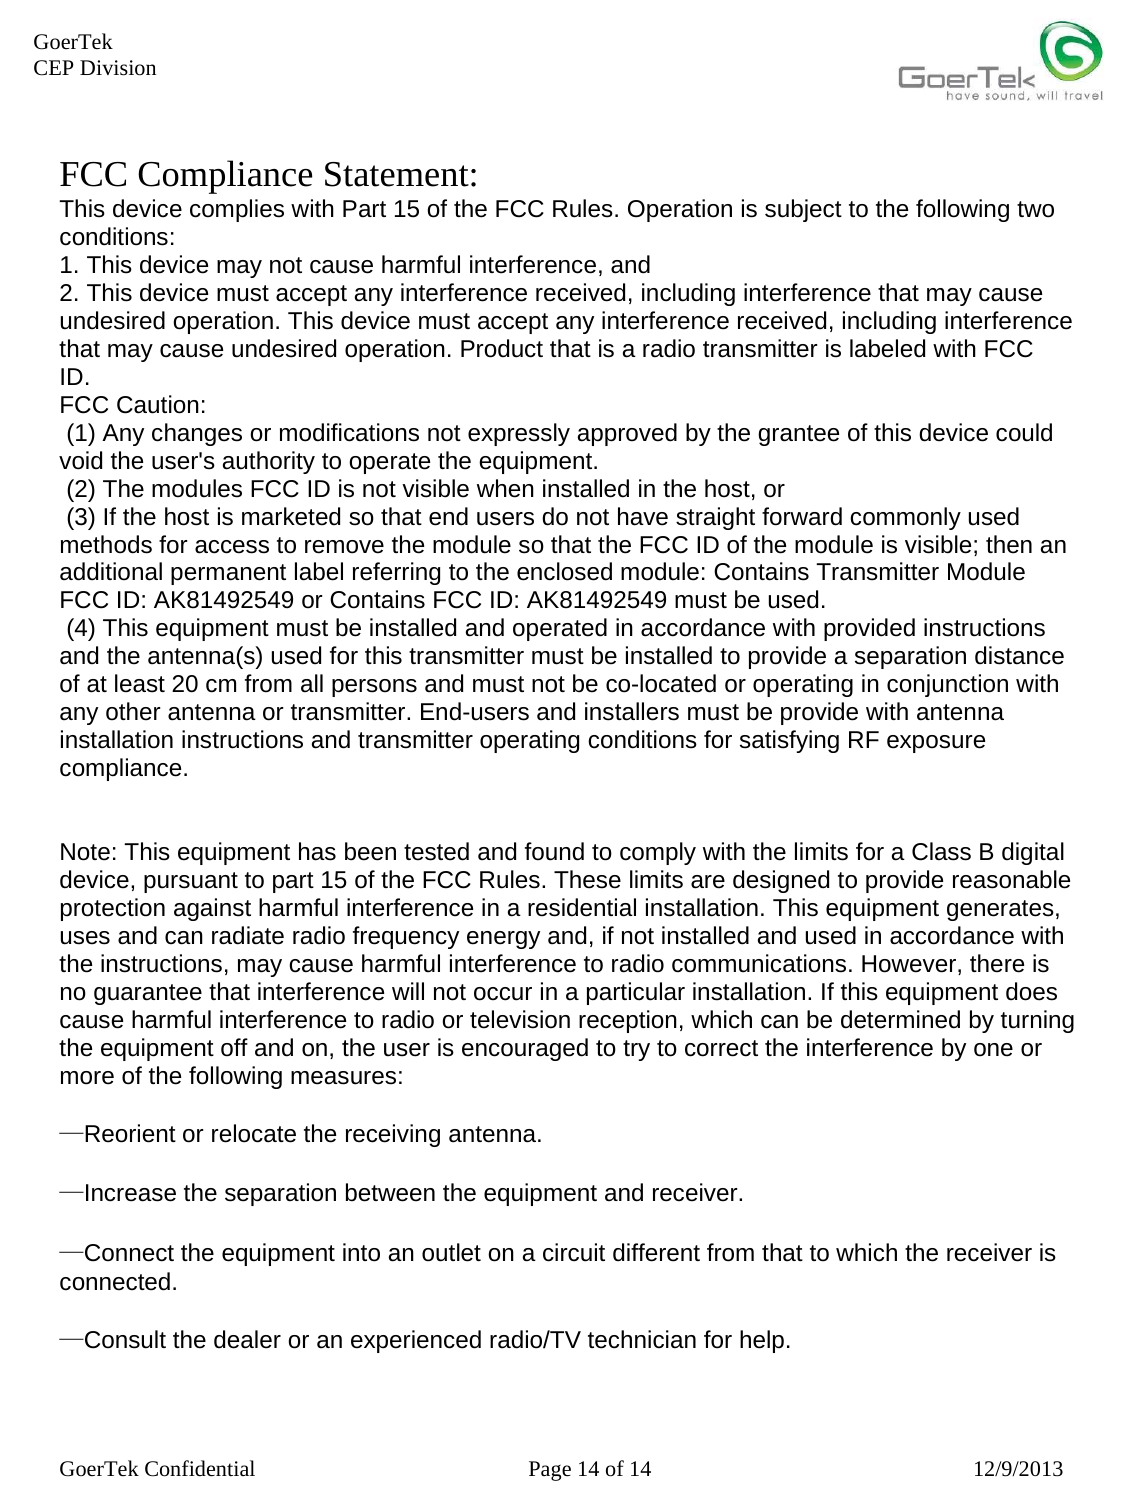     GoerTek Confidential  Page 14 of 14  12/9/2013 GoerTek  CEP Division FCC Compliance Statement: This device complies with Part 15 of the FCC Rules. Operation is subject to the following two conditions: 1. This device may not cause harmful interference, and 2. This device must accept any interference received, including interference that may cause undesired operation. This device must accept any interference received, including interference that may cause undesired operation. Product that is a radio transmitter is labeled with FCC ID. FCC Caution:  (1) Any changes or modifications not expressly approved by the grantee of this device could void the user&apos;s authority to operate the equipment.  (2) The modules FCC ID is not visible when installed in the host, or  (3) If the host is marketed so that end users do not have straight forward commonly used methods for access to remove the module so that the FCC ID of the module is visible; then an additional permanent label referring to the enclosed module: Contains Transmitter Module FCC ID: AK81492549 or Contains FCC ID: AK81492549 must be used.   (4) This equipment must be installed and operated in accordance with provided instructions and the antenna(s) used for this transmitter must be installed to provide a separation distance of at least 20 cm from all persons and must not be co-located or operating in conjunction with any other antenna or transmitter. End-users and installers must be provide with antenna installation instructions and transmitter operating conditions for satisfying RF exposure compliance.    Note: This equipment has been tested and found to comply with the limits for a Class B digital device, pursuant to part 15 of the FCC Rules. These limits are designed to provide reasonable protection against harmful interference in a residential installation. This equipment generates, uses and can radiate radio frequency energy and, if not installed and used in accordance with the instructions, may cause harmful interference to radio communications. However, there is no guarantee that interference will not occur in a particular installation. If this equipment does cause harmful interference to radio or television reception, which can be determined by turning the equipment off and on, the user is encouraged to try to correct the interference by one or more of the following measures:  —Reorient or relocate the receiving antenna.  —Increase the separation between the equipment and receiver.  —Connect the equipment into an outlet on a circuit different from that to which the receiver is connected.  —Consult the dealer or an experienced radio/TV technician for help.    